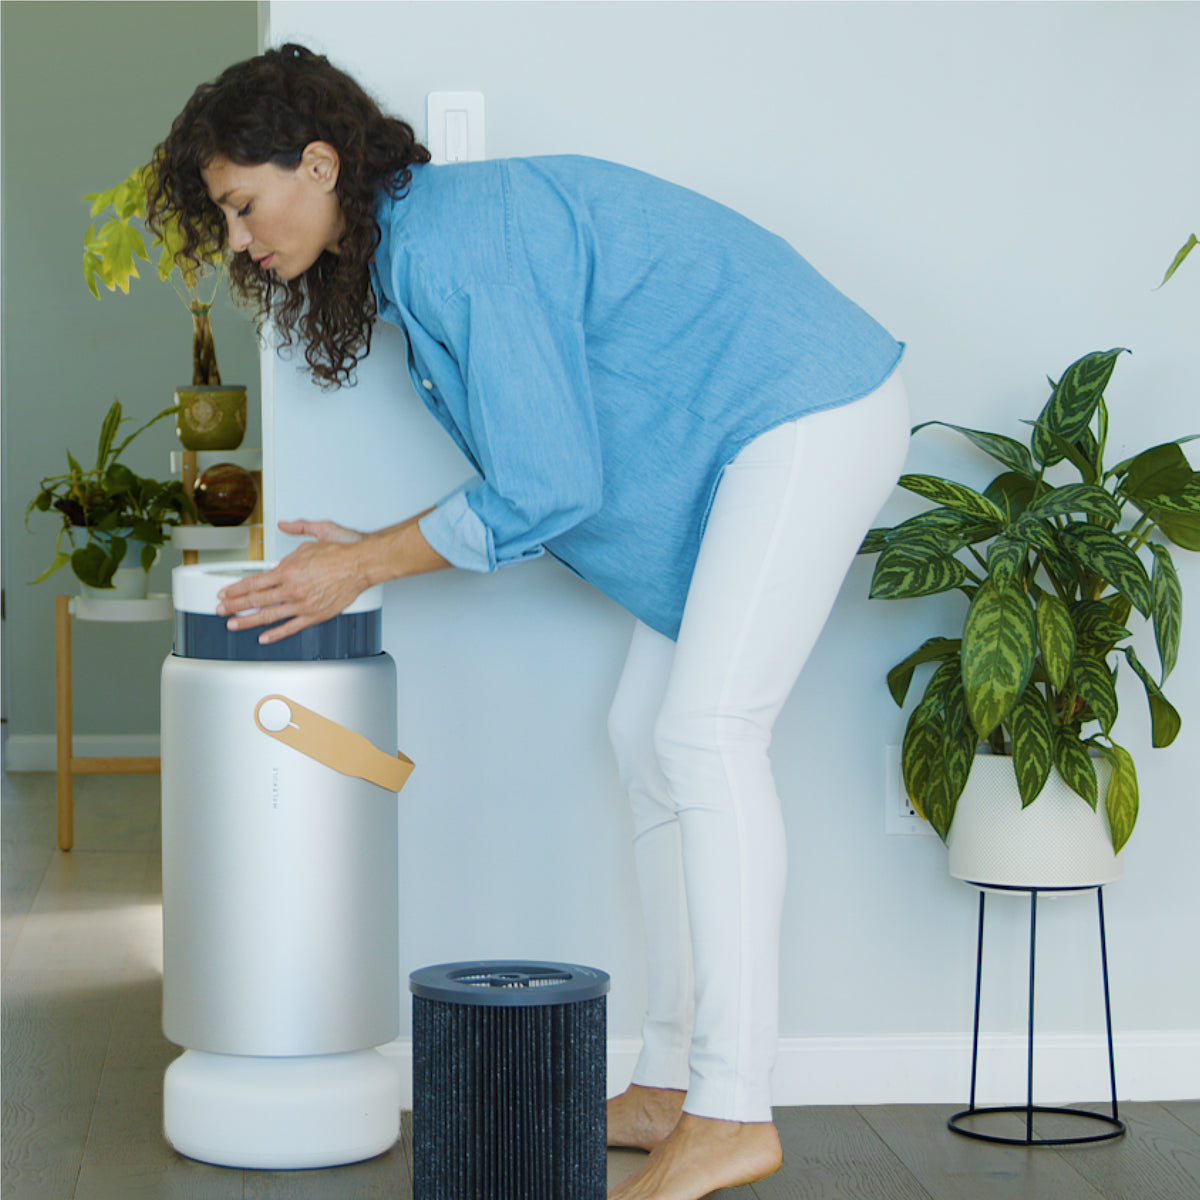 Woman removing the top of Air Pro air purifier to change filter.